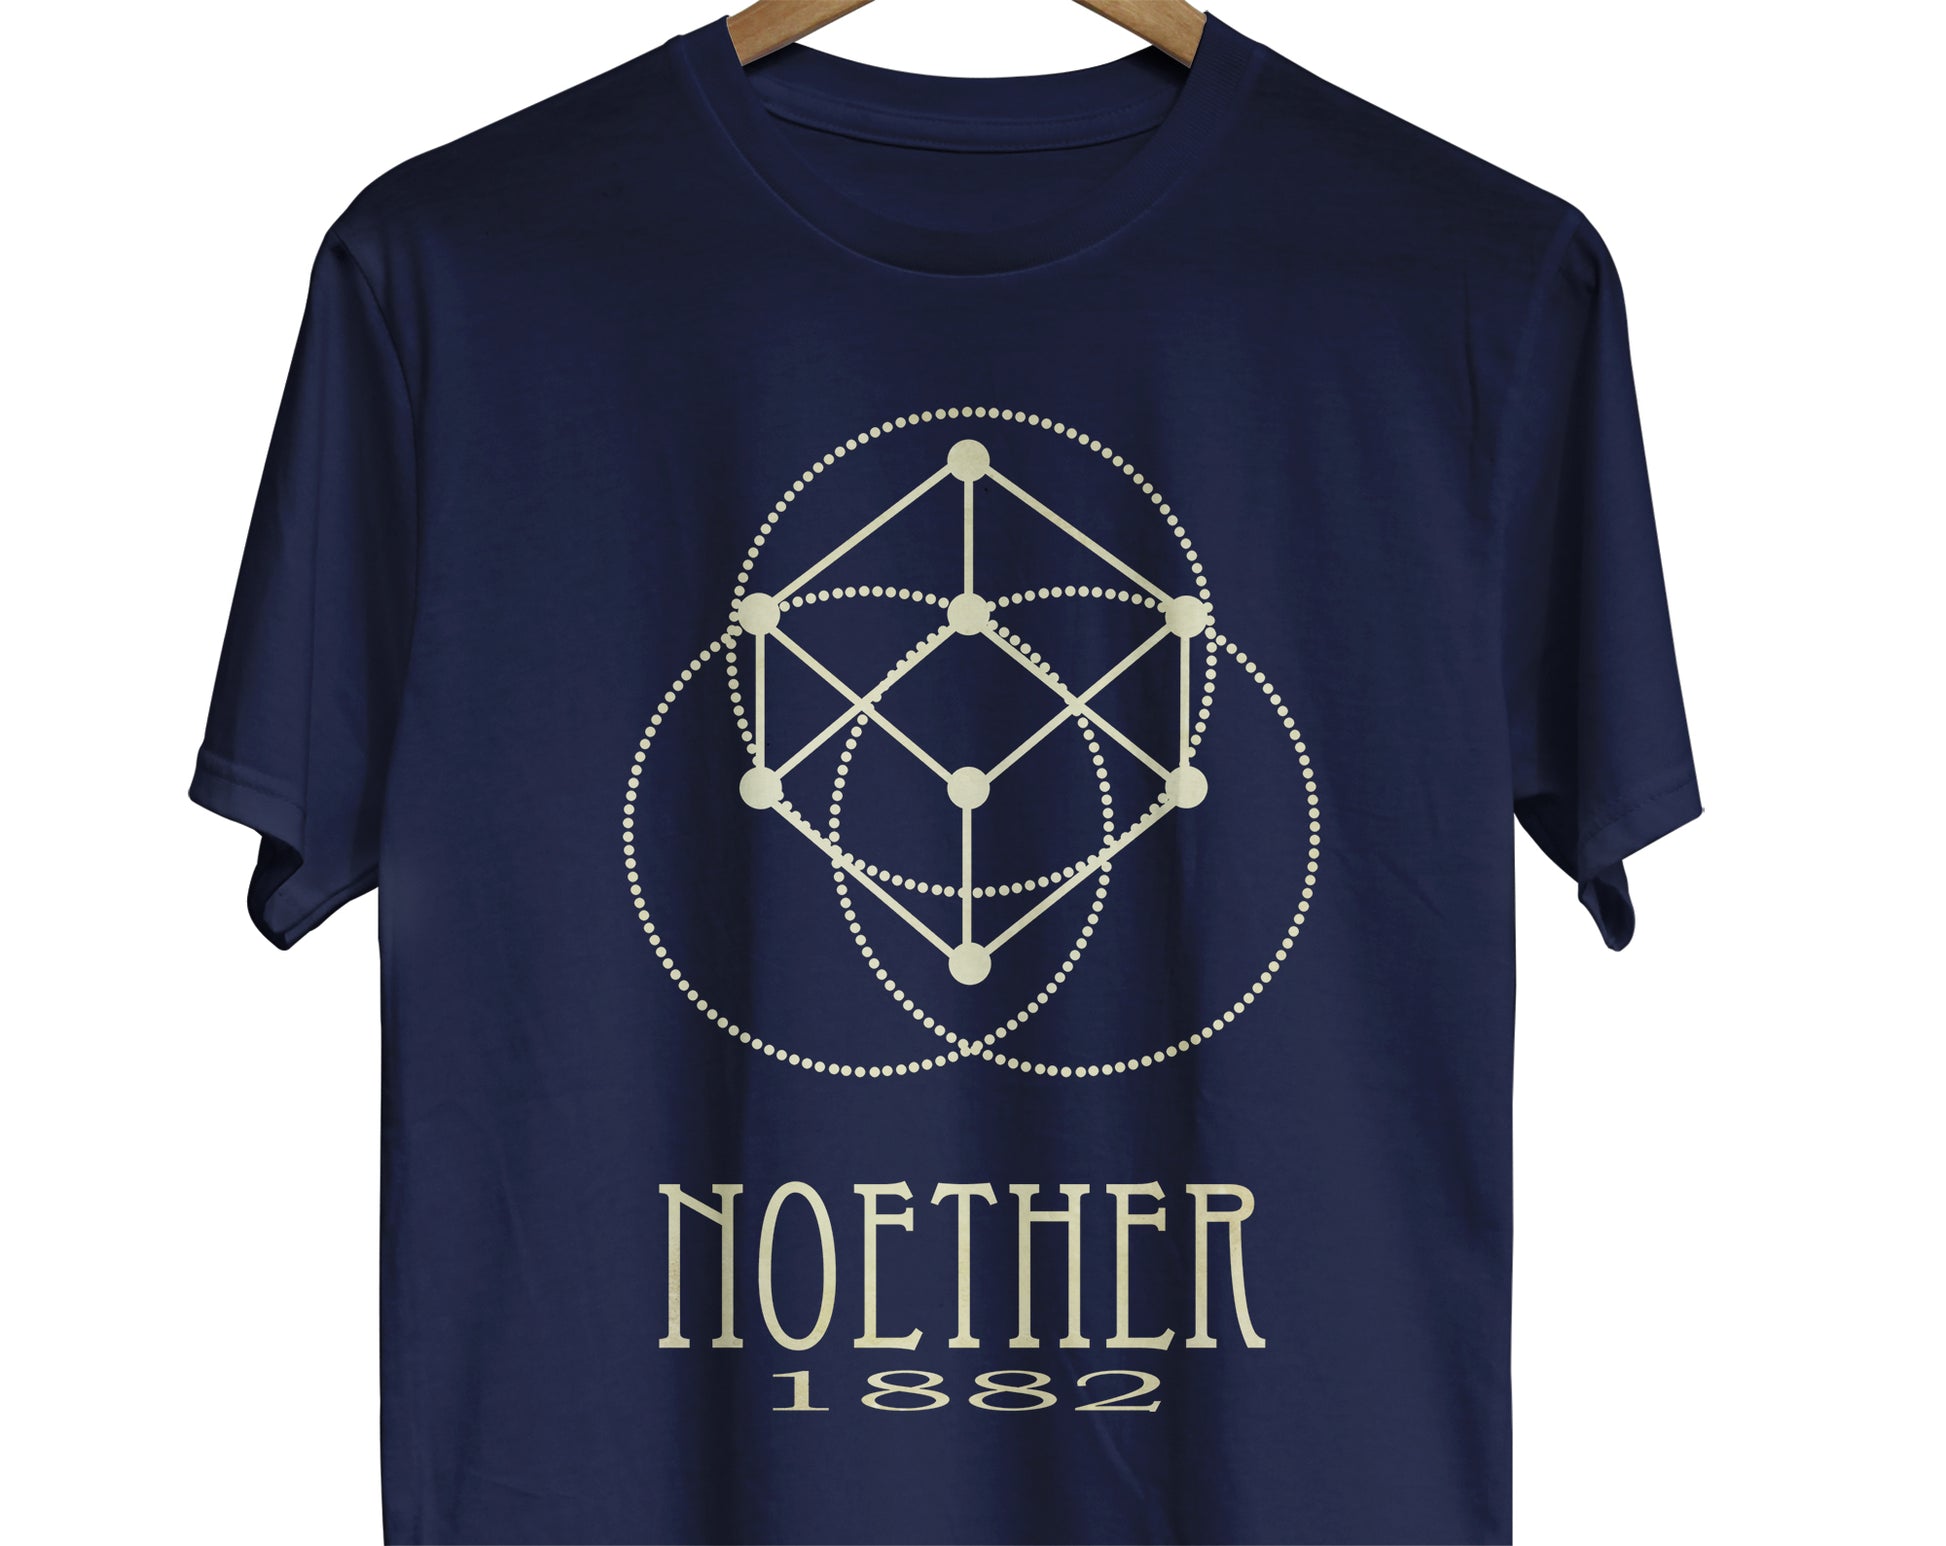 Emmy Noether math t-shirt with symmetry design